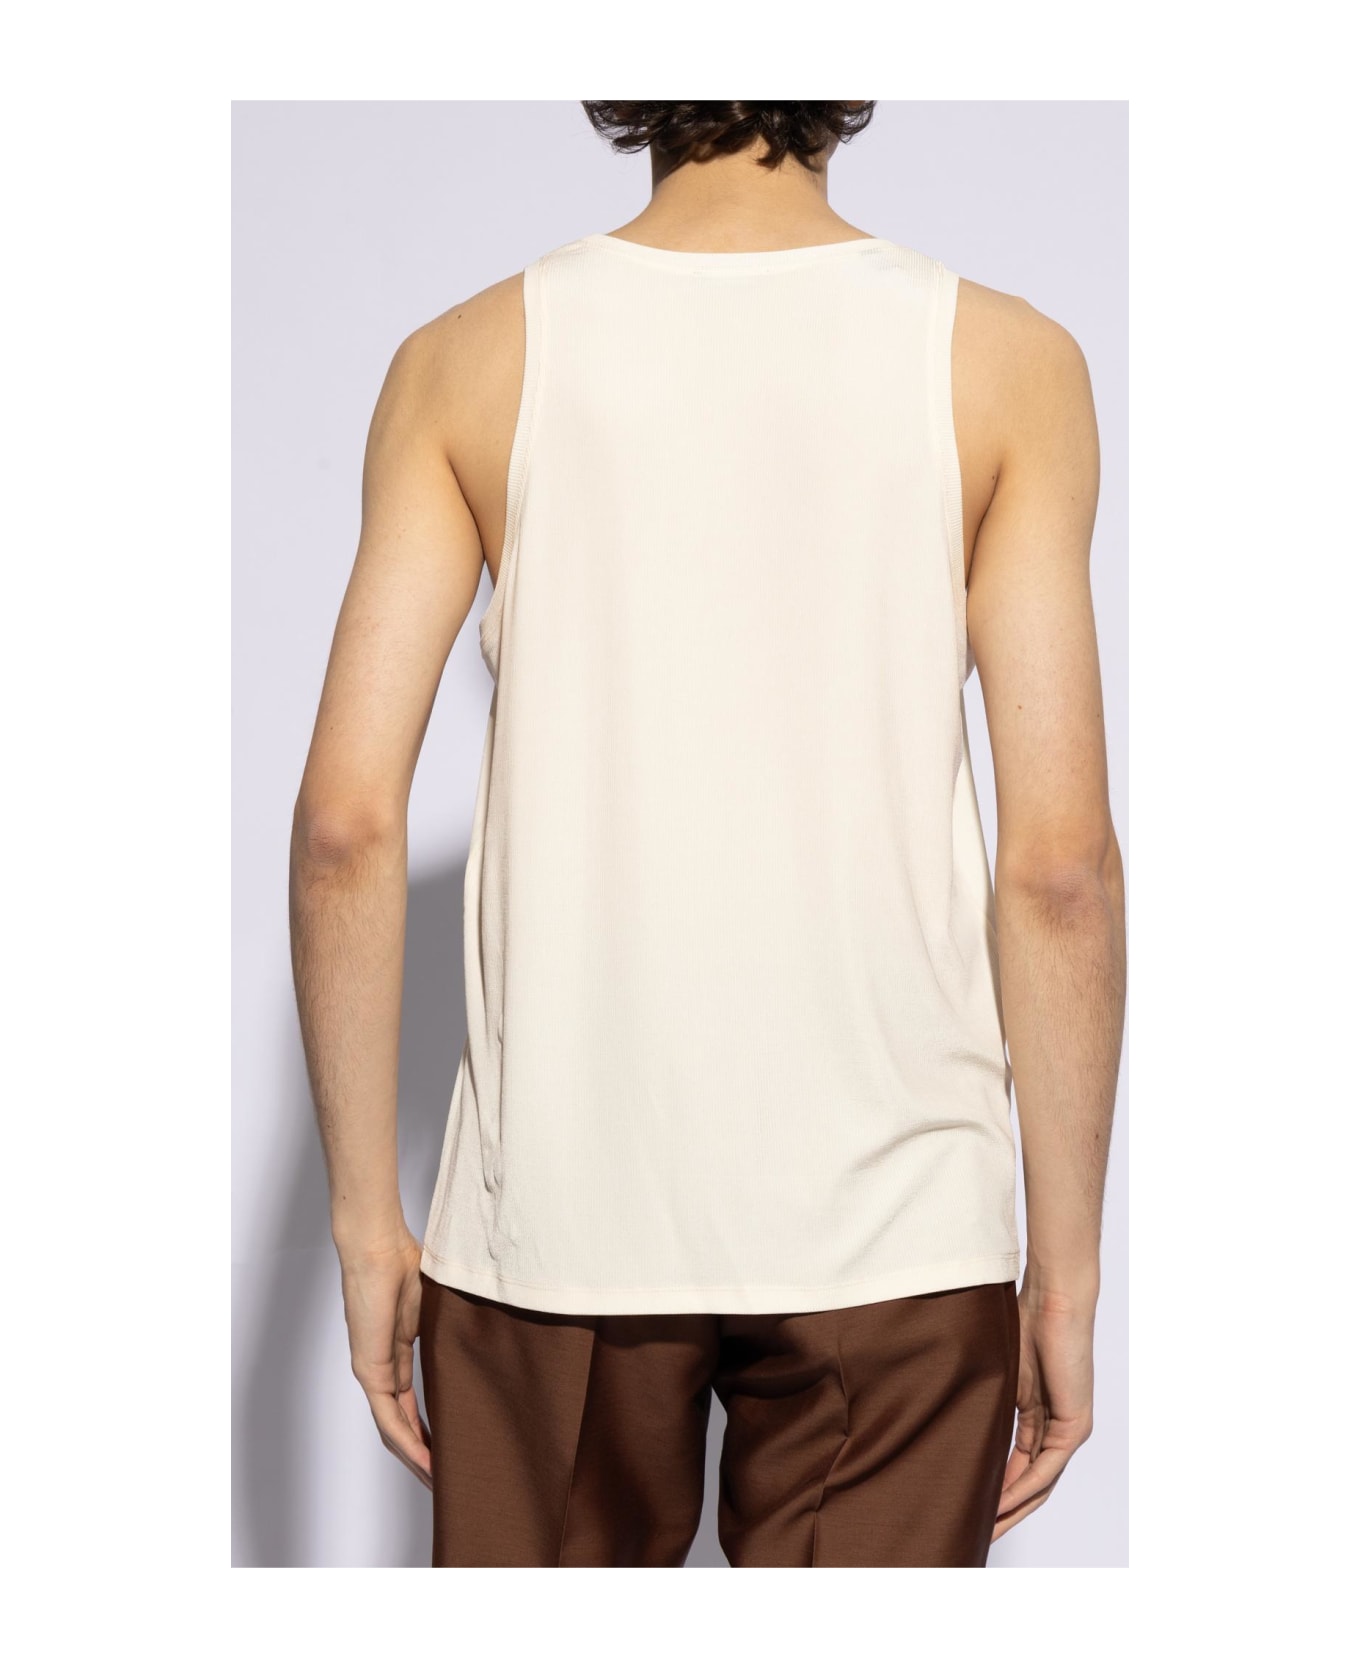 Tom Ford Ribbed Top - White